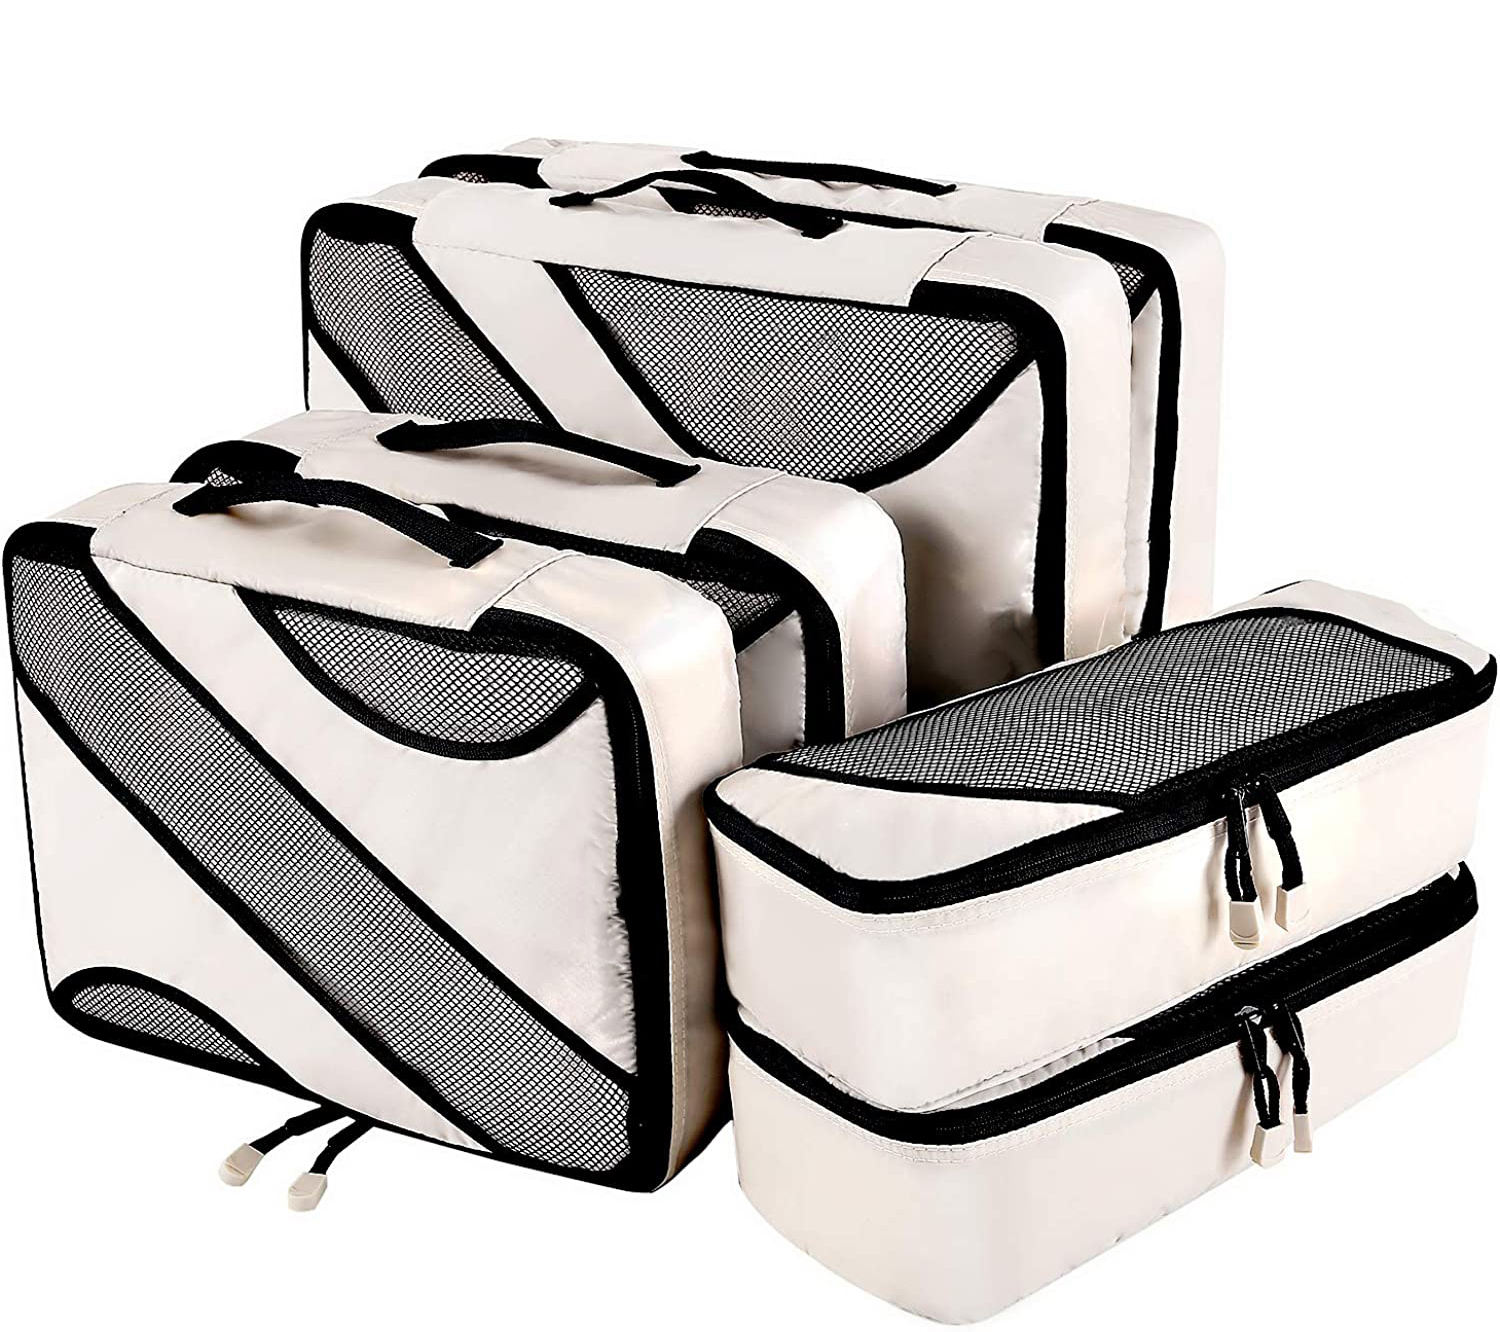 6 Set Packing Cubes 3 Various Sizes Travel Luggage Packing Organizers Bag Travel Bag Organizer For Clothing Shoes